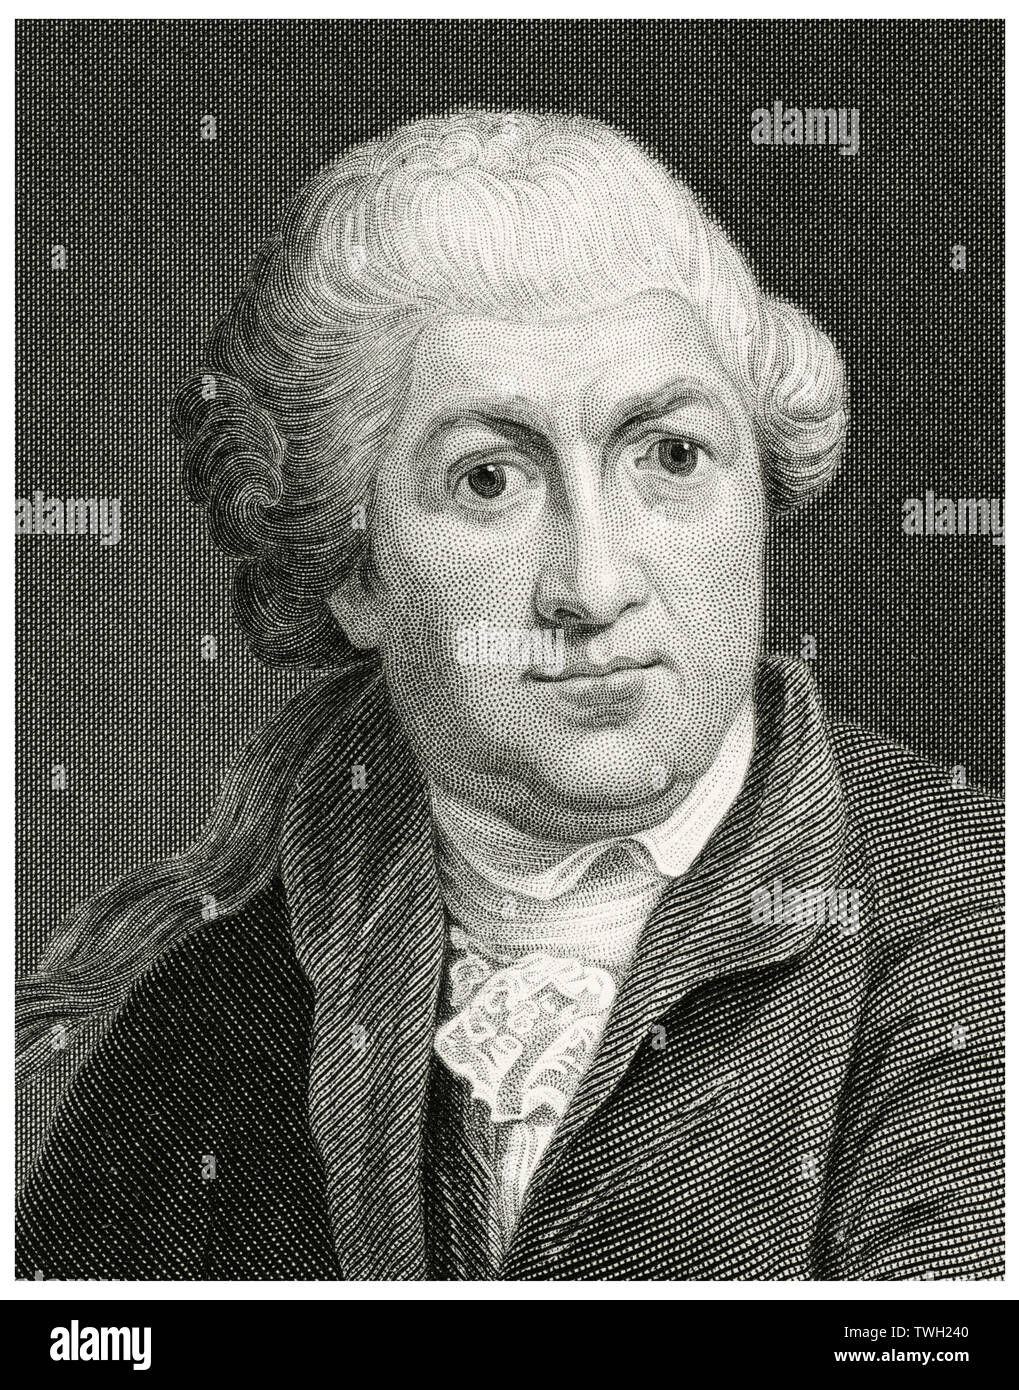 David Garrick (1717-79), English Actor, Playwright, Theater Manager and Poet, Head and Shoulders Portrait, Steel Engraving, Portrait Gallery of Eminent Men and Women of Europe and America by Evert A. Duyckinck, Published by Henry J. Johnson, Johnson, Wilson & Company, New York, 1873 Stock Photo